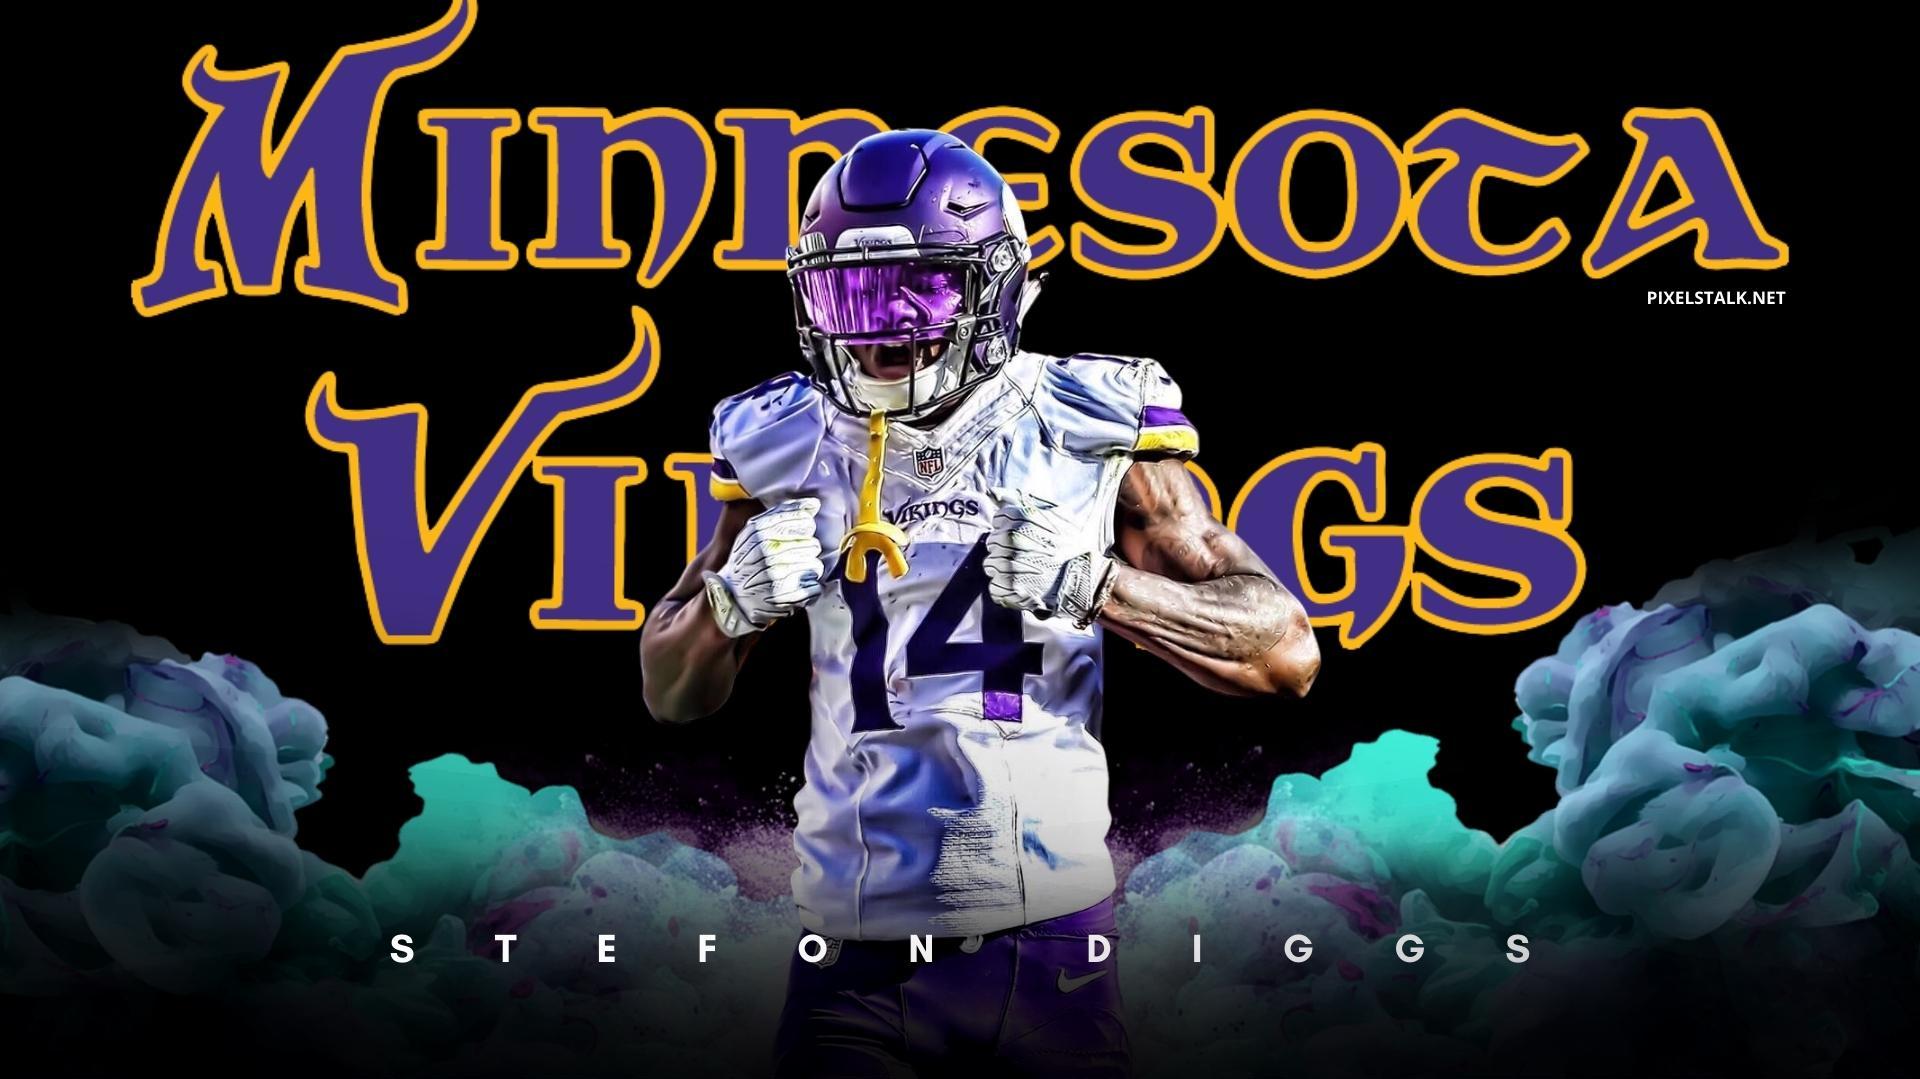 Stefon Diggs Wallpapers